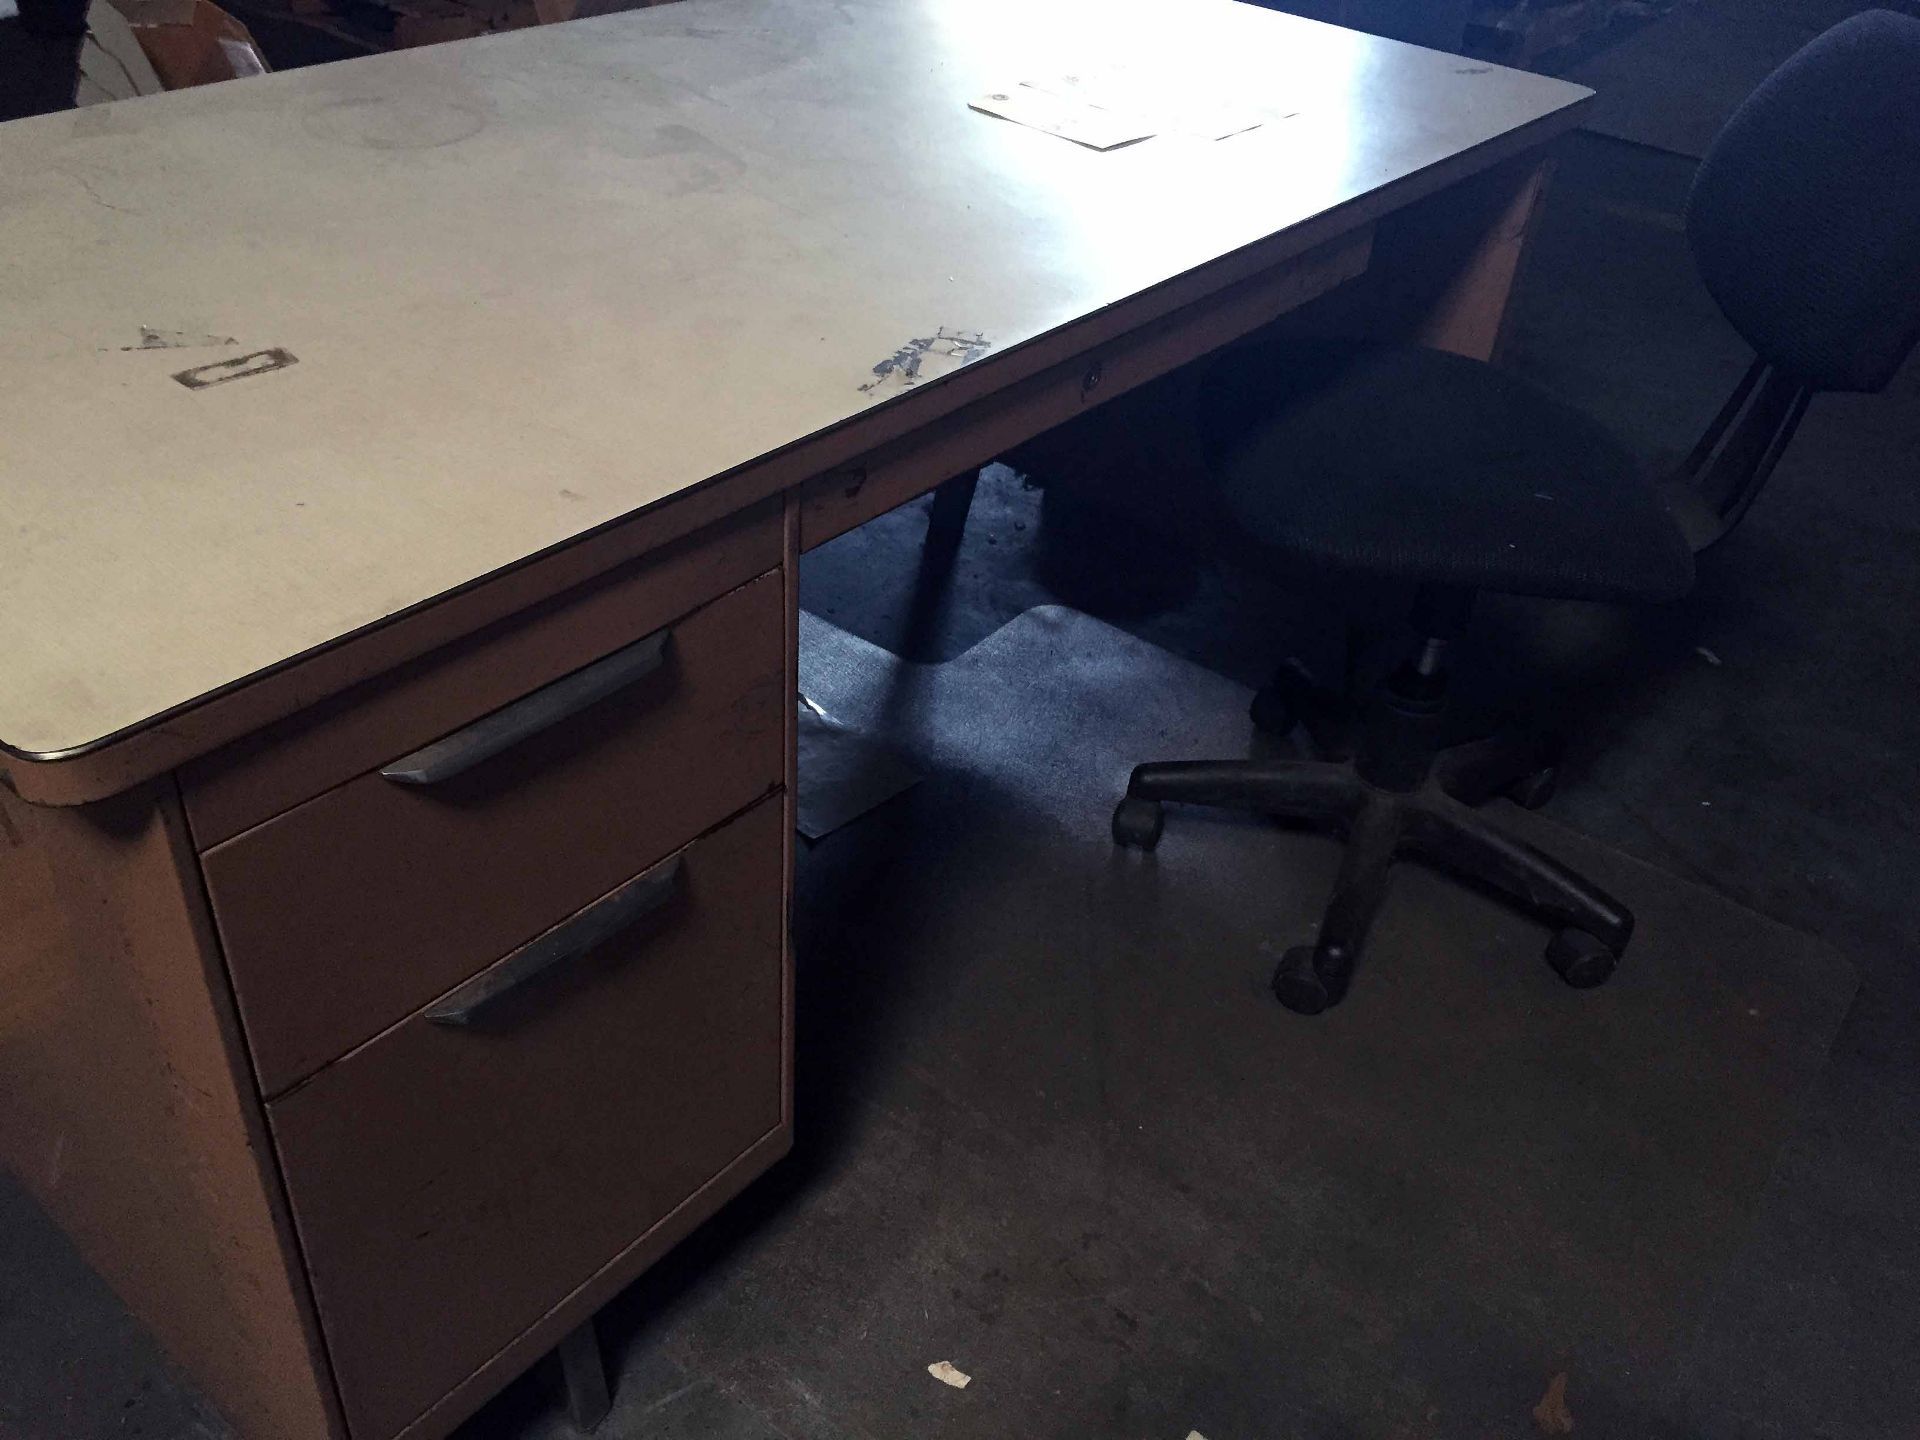 LOT OF OFFICE FURNITURE: metal desk, chair & hard mat LOCATED IN LONGVIEW, TX - Image 2 of 2